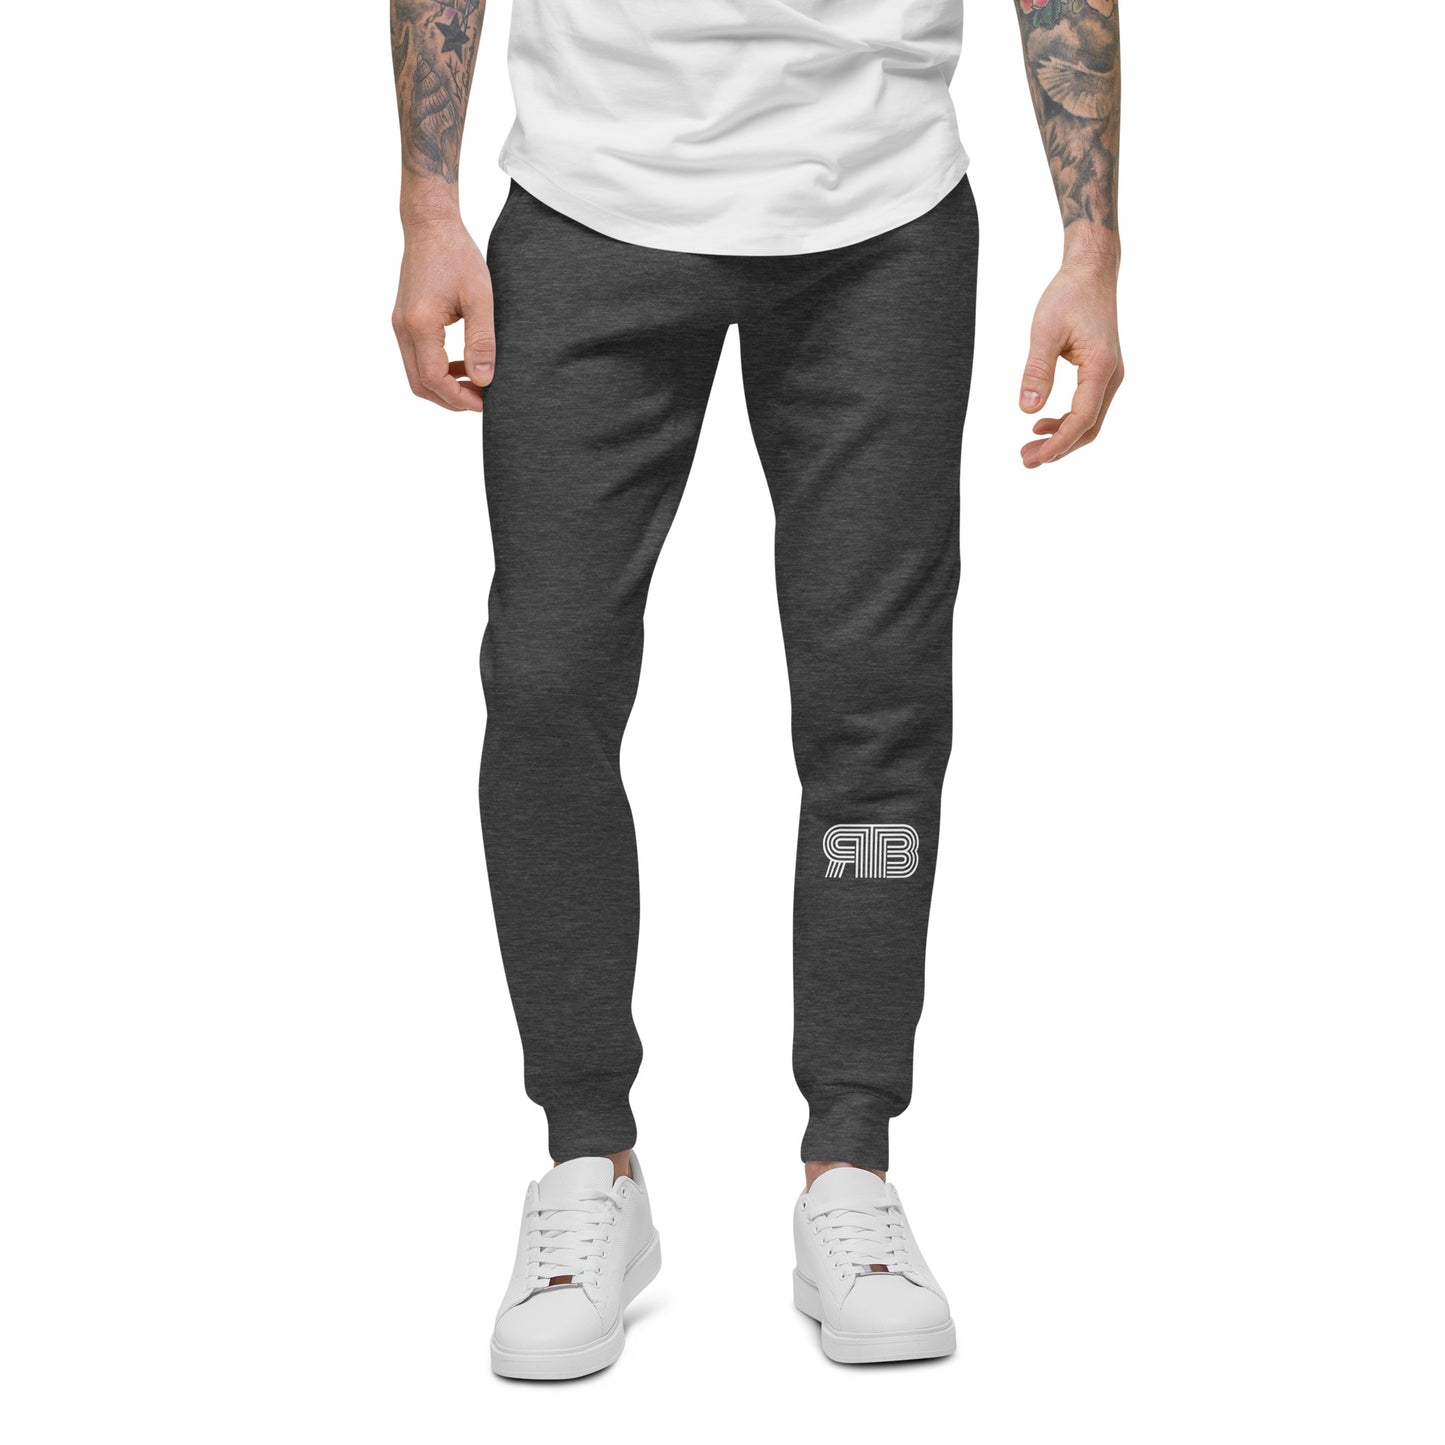 RB "Charcoal Heather" Men's Joggers